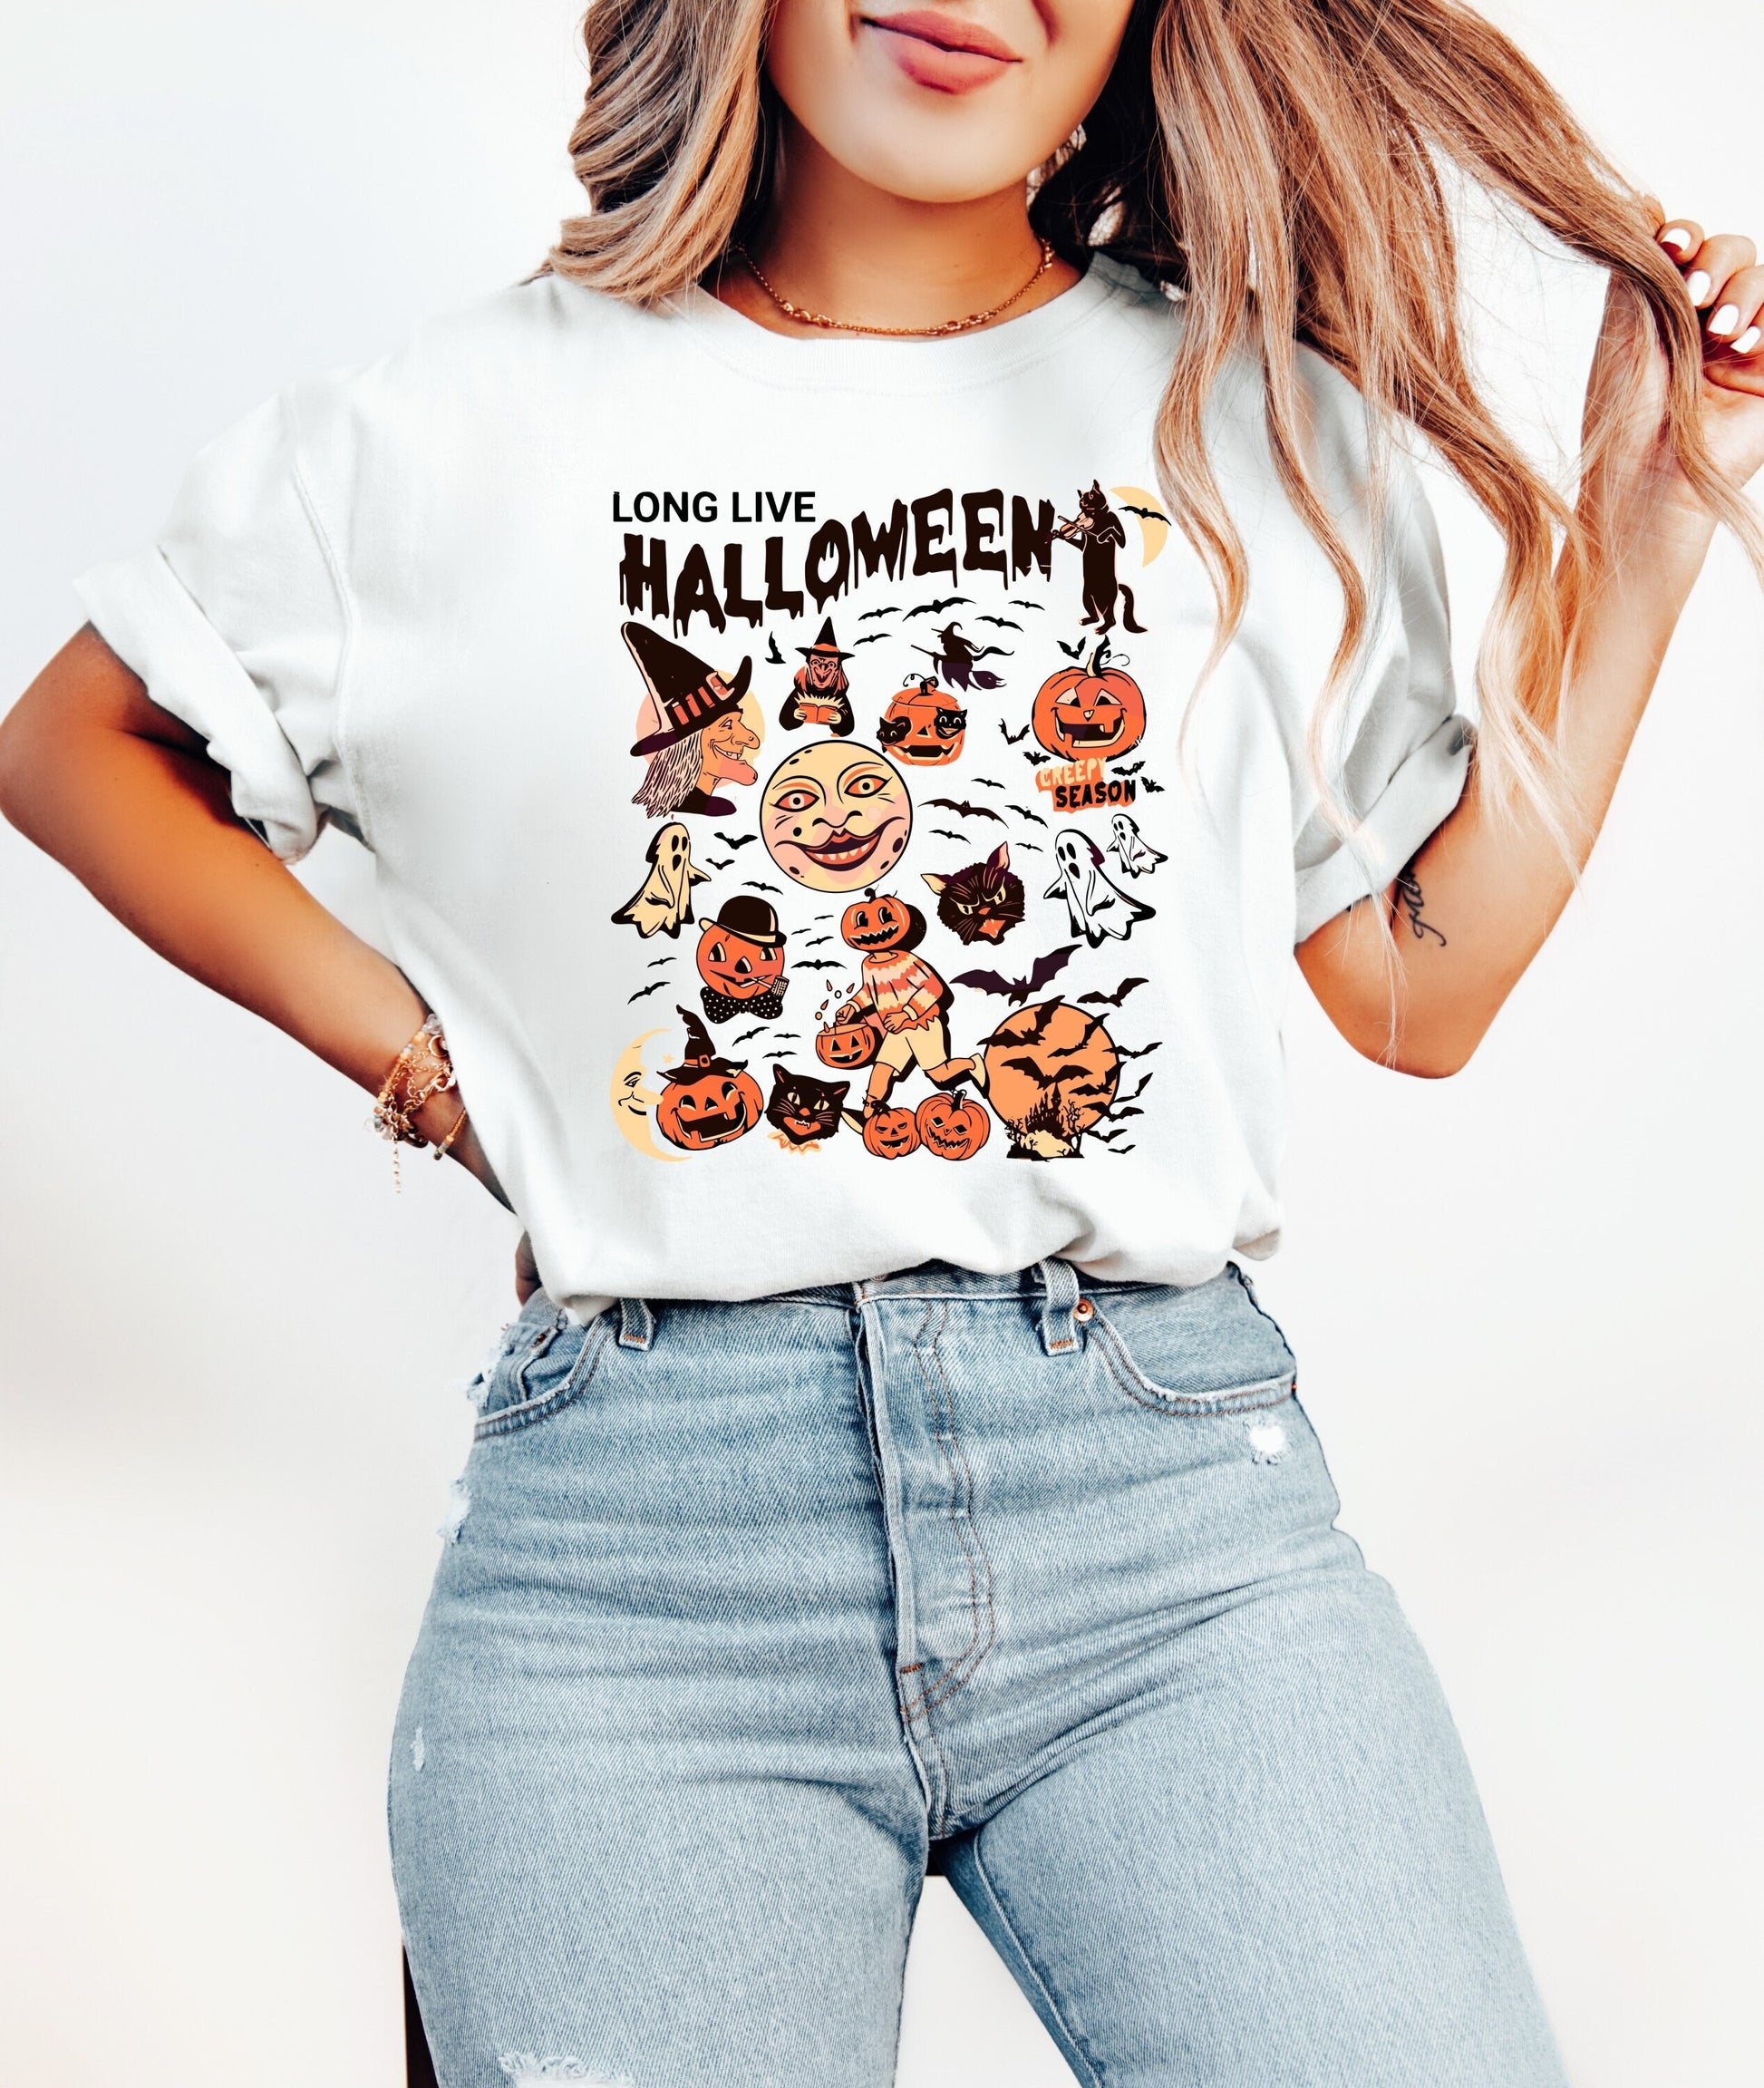 Long Live Halloween Shirt, Coquette Bow Halloween Shirt, Halloween Shirts, Spooky Season Shirt, Coquette Top